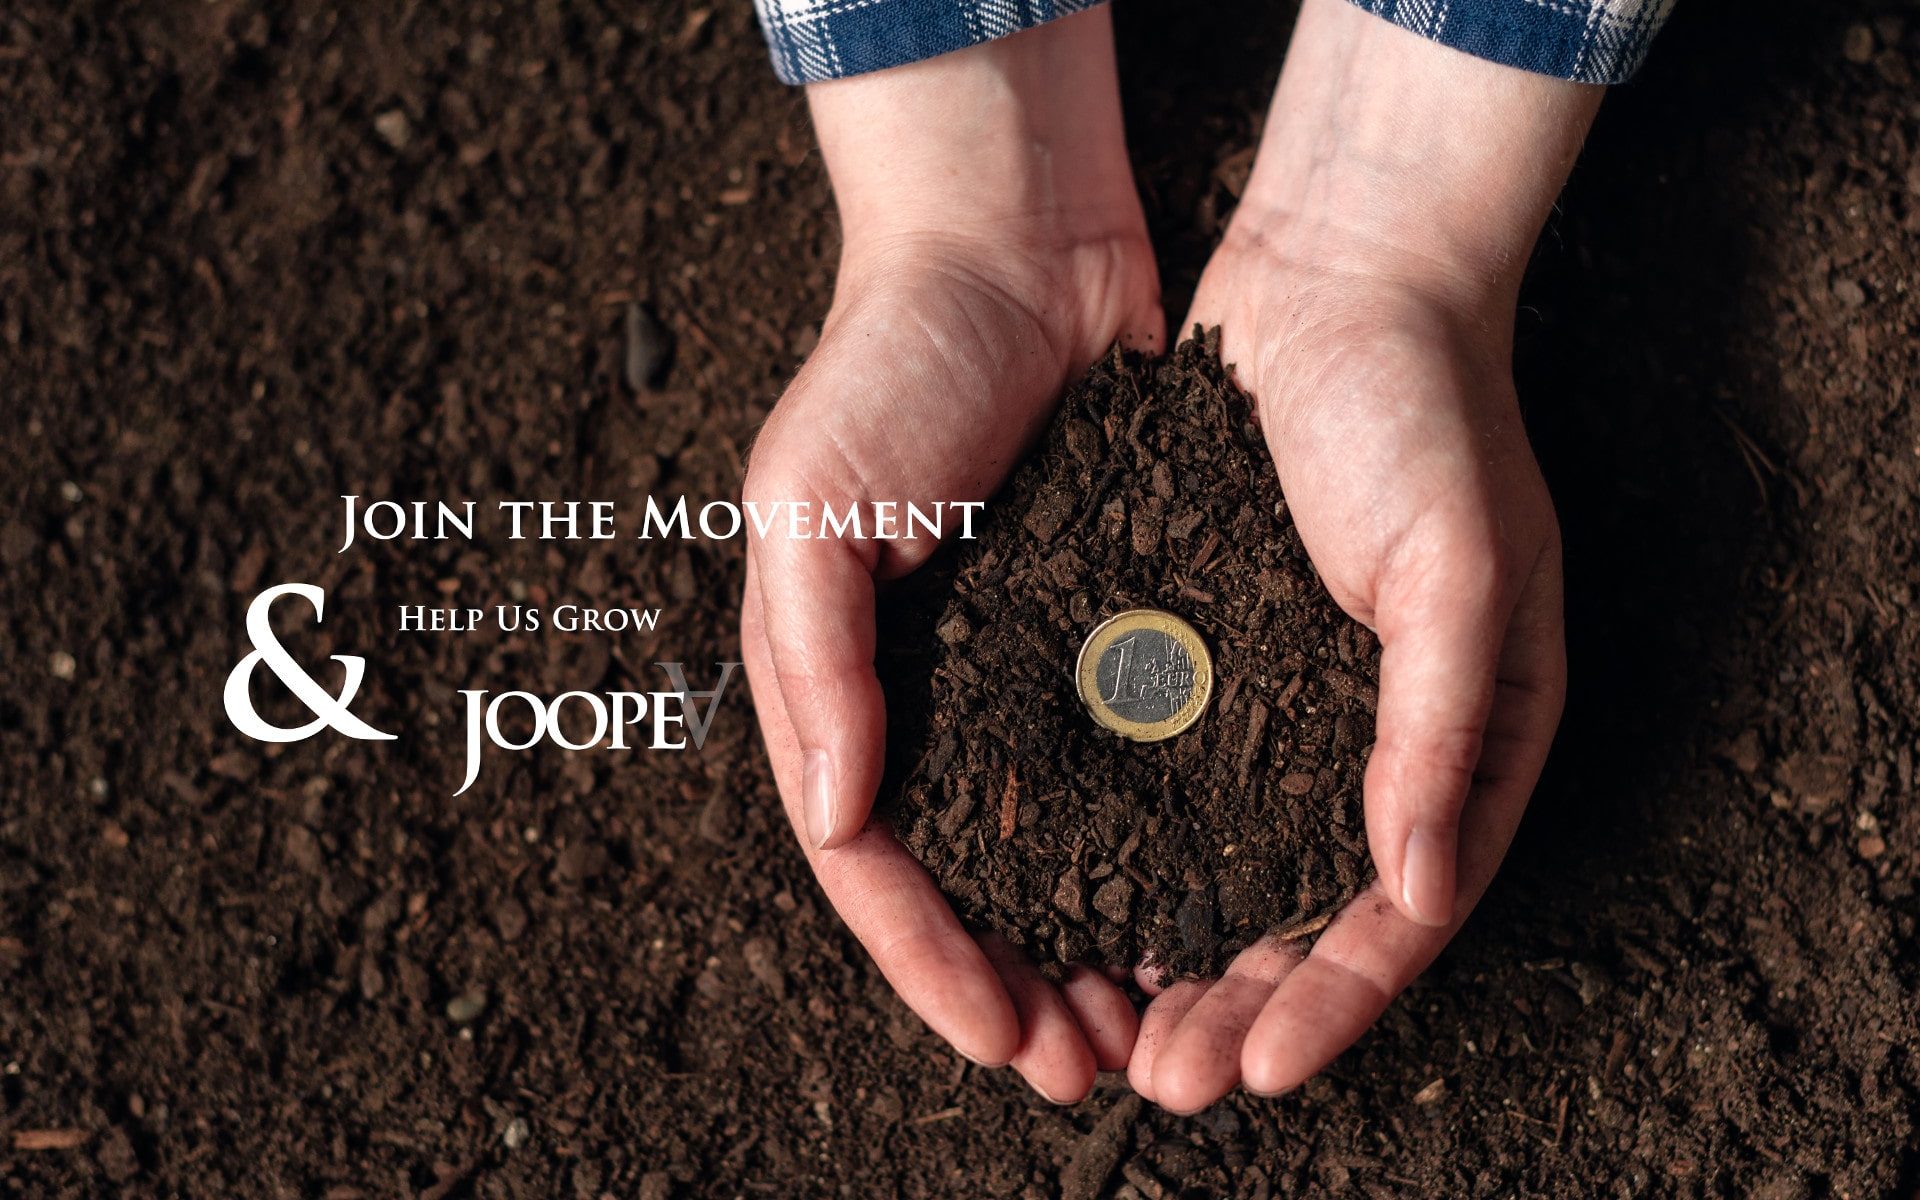 Donate, help us grow & join the movement of JoopeA